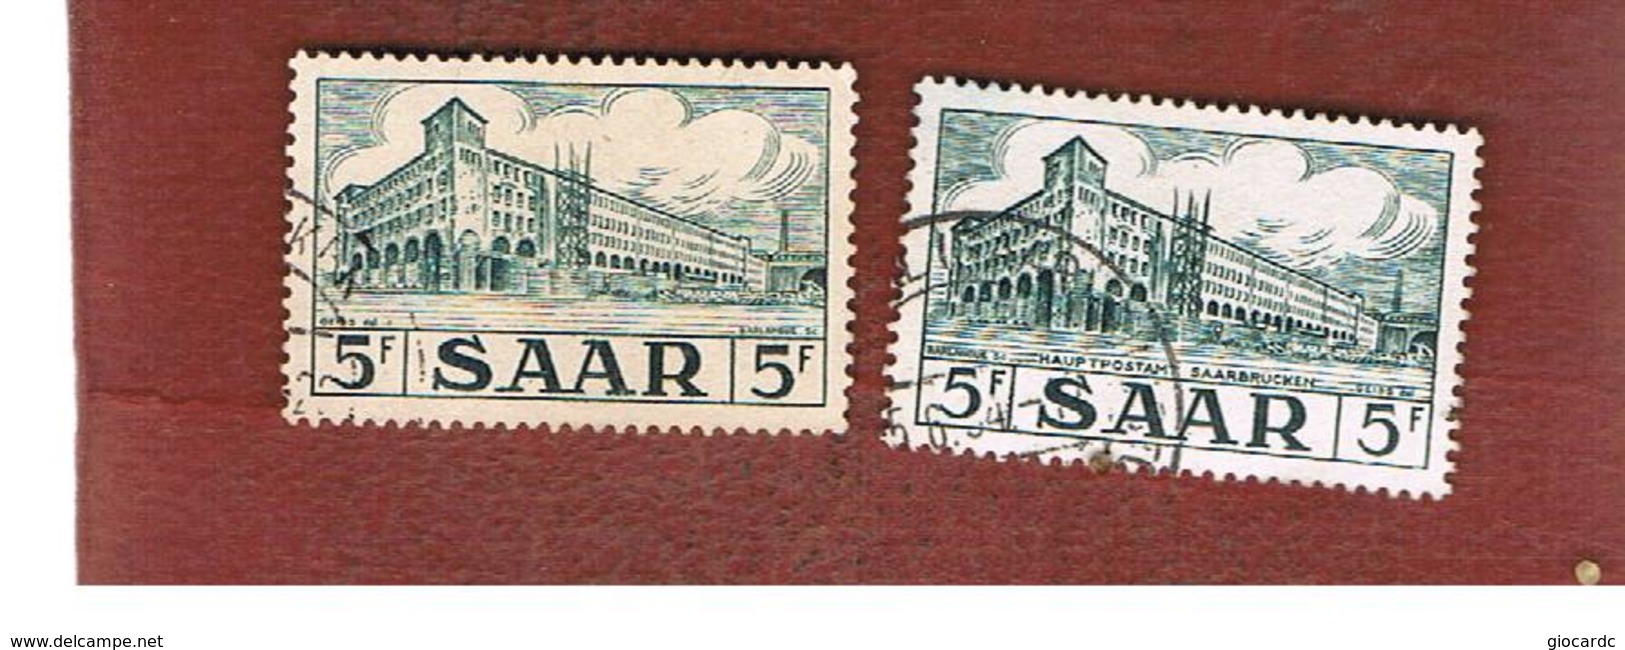 SAAR (SARRE) - SG 319.320 - 1952.1954 POST OFFICE (2 STAMPS WITH & WITHOUT INSCRIZ.)  - USED - Usati